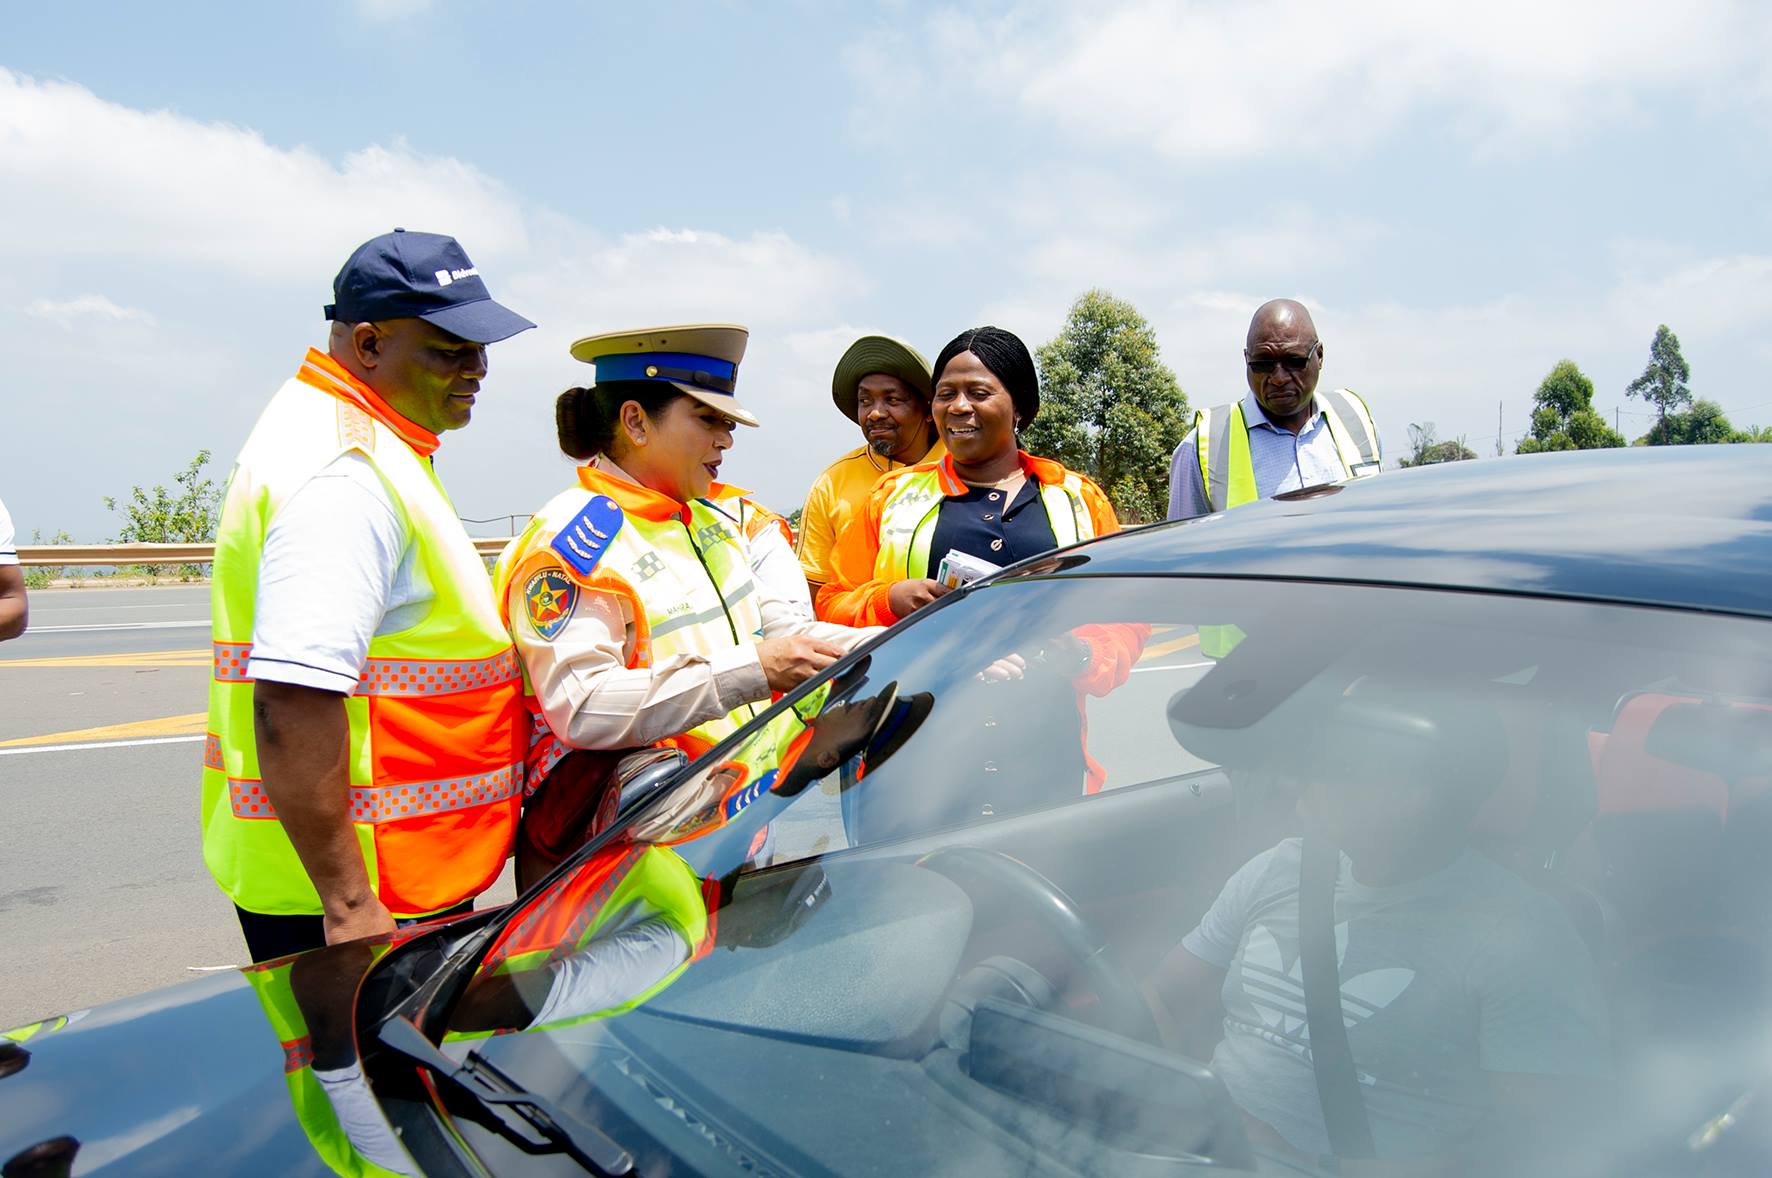 Provincial Road Safety activation program with a road block at Eshowe, KZN